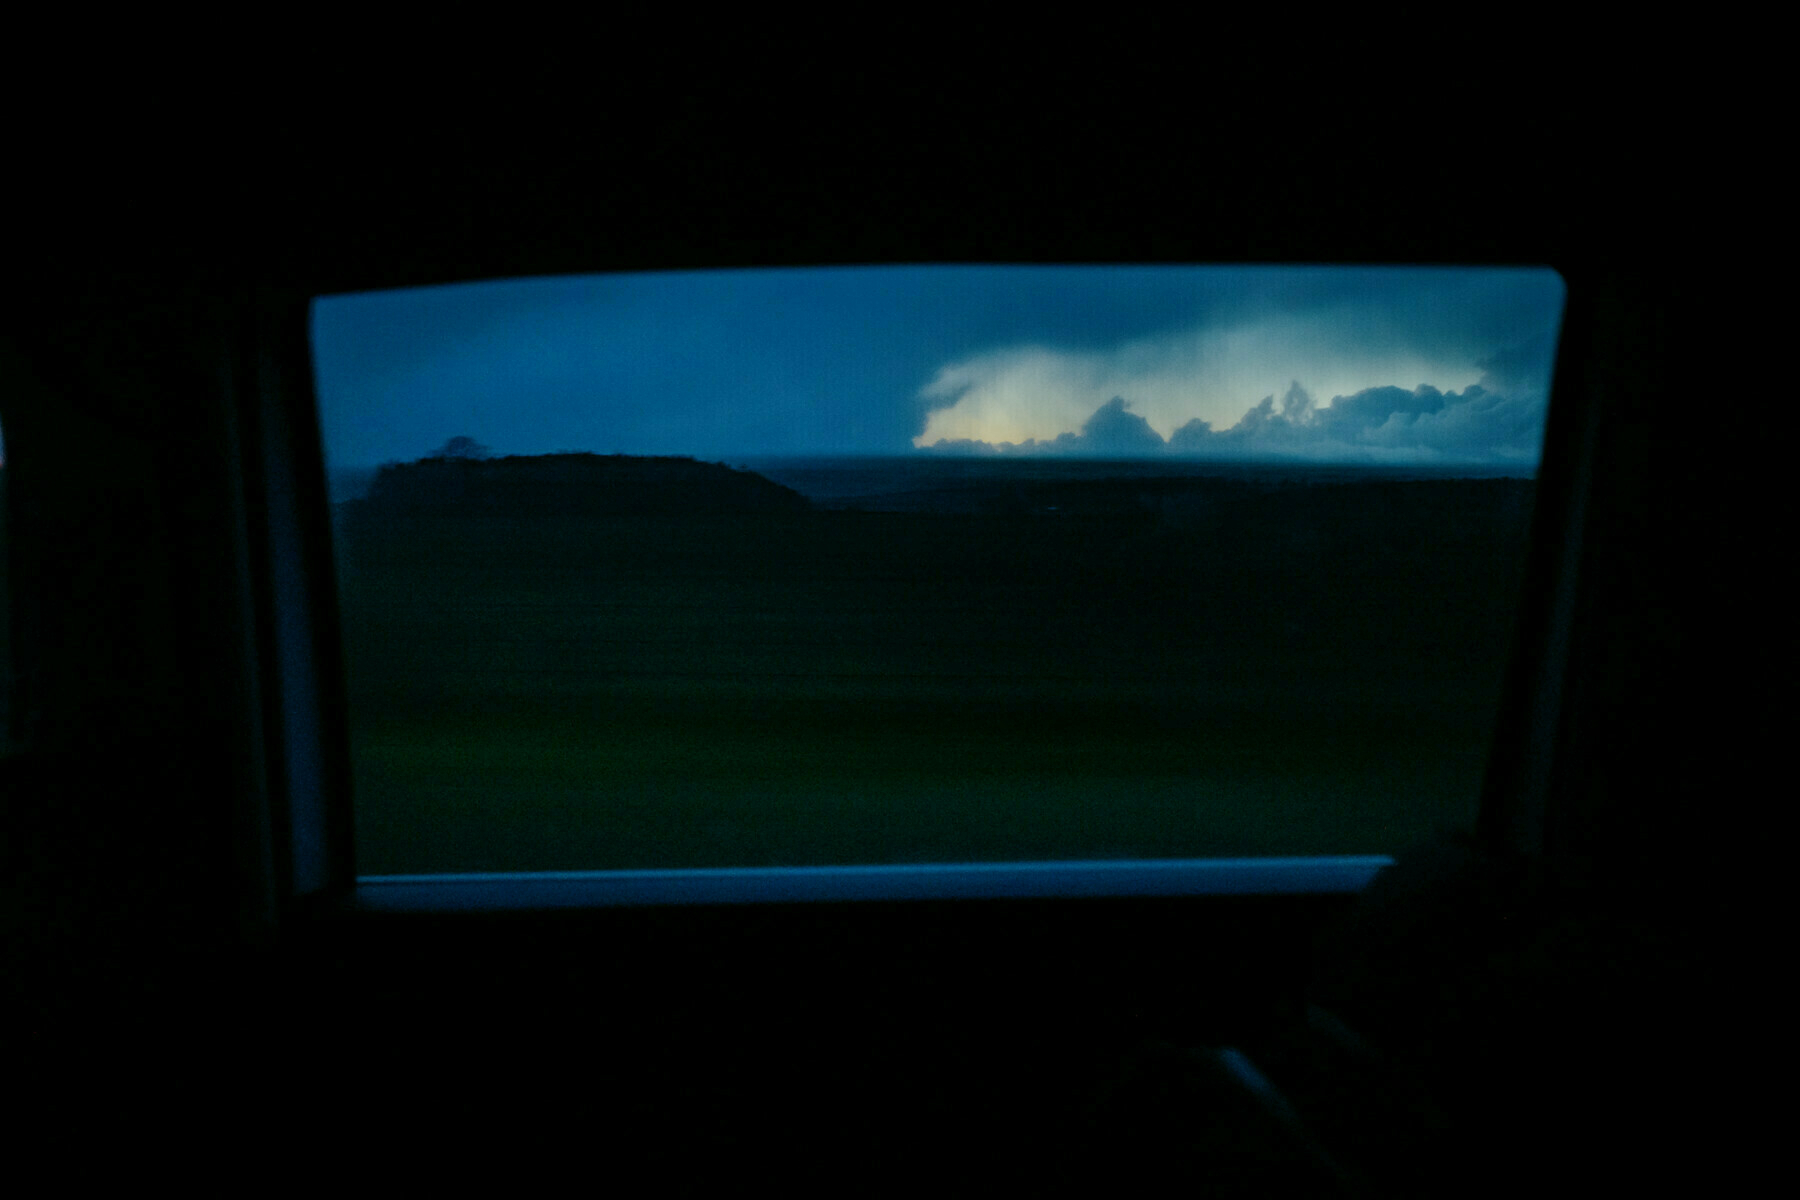 A car window frames a night time landscape, with the fading light of dusk seen through a hole in the storm clouds on the horizon. The interior of the car is dark and the landscape is blurred from by the speed of travel